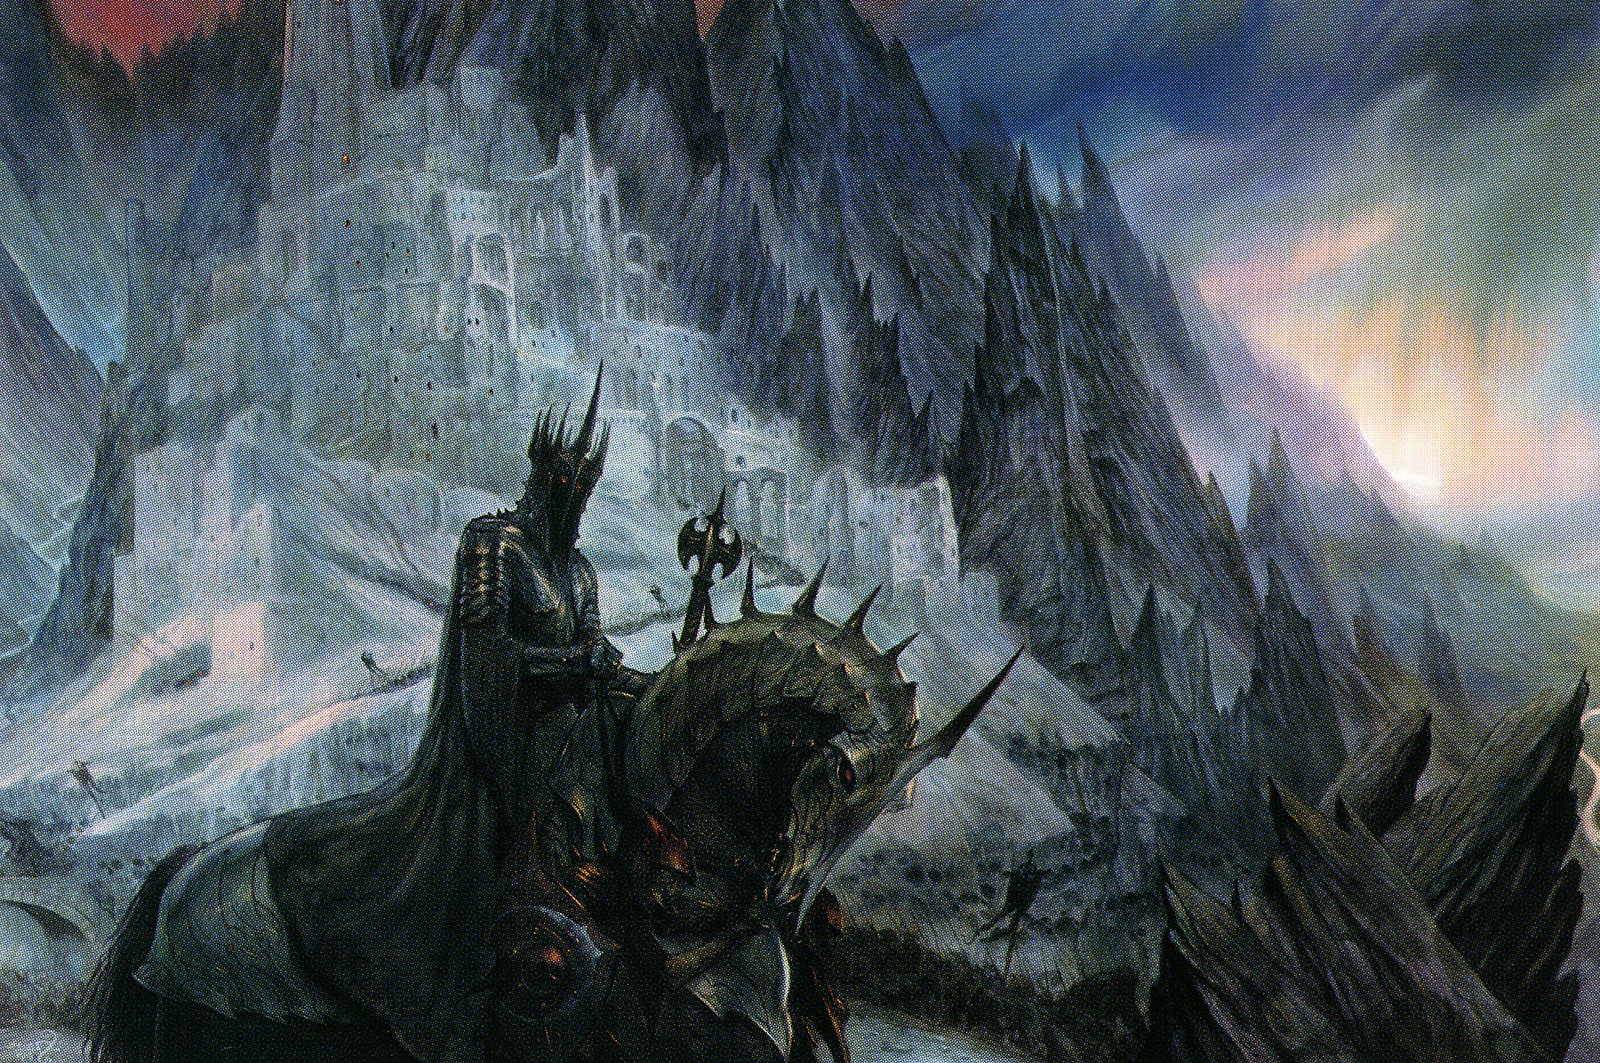 General 1600x1063 The Lord of the Rings John Howe fantasy art horse Nazgûl Witch King of Angmar artwork